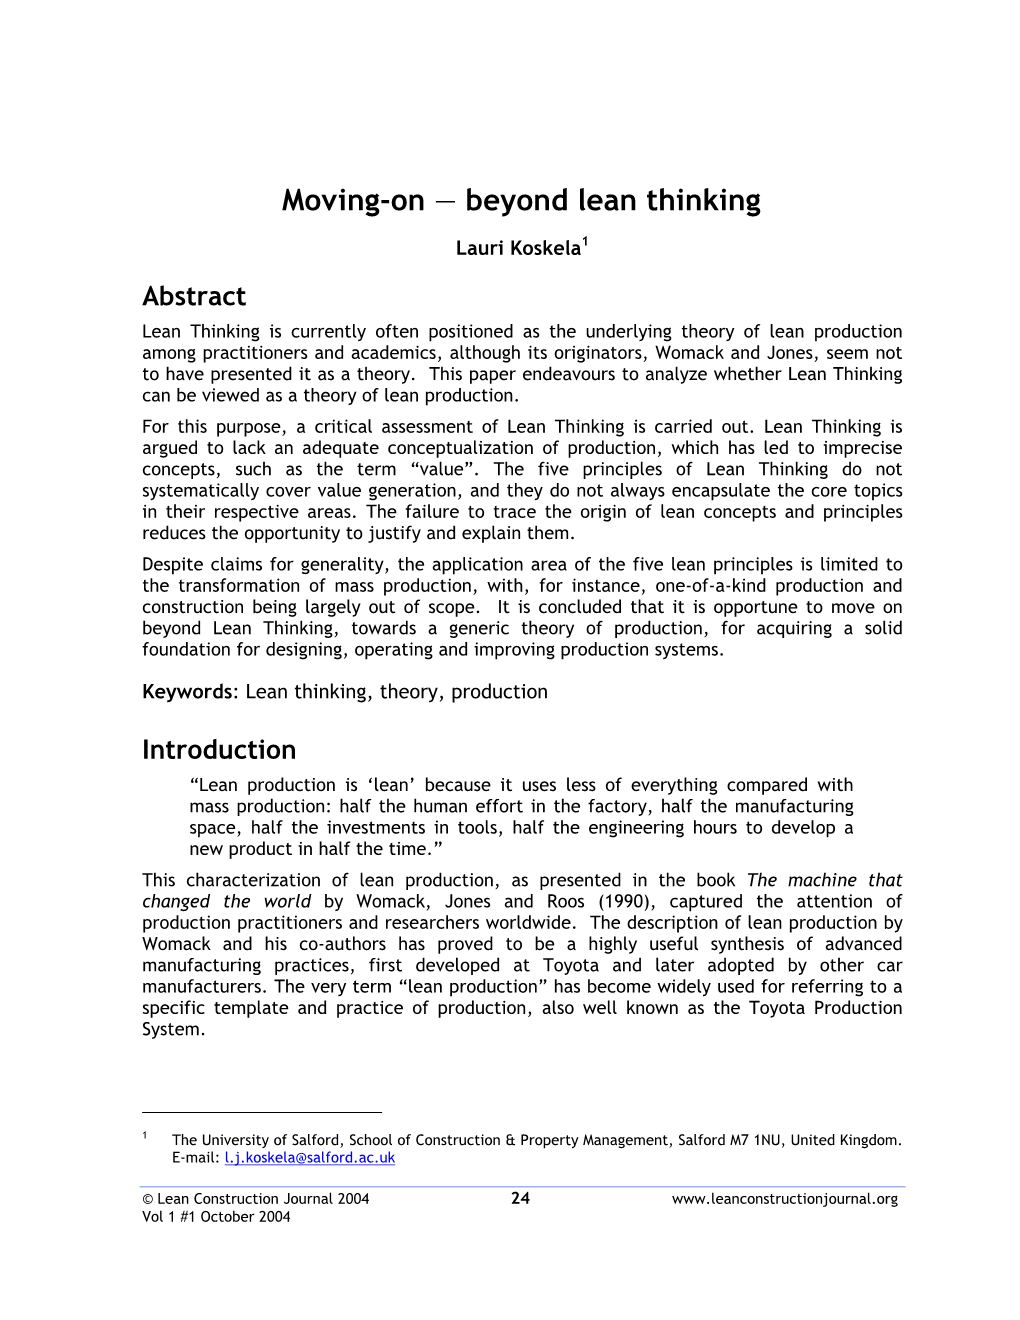 Moving-On — Beyond Lean Thinking